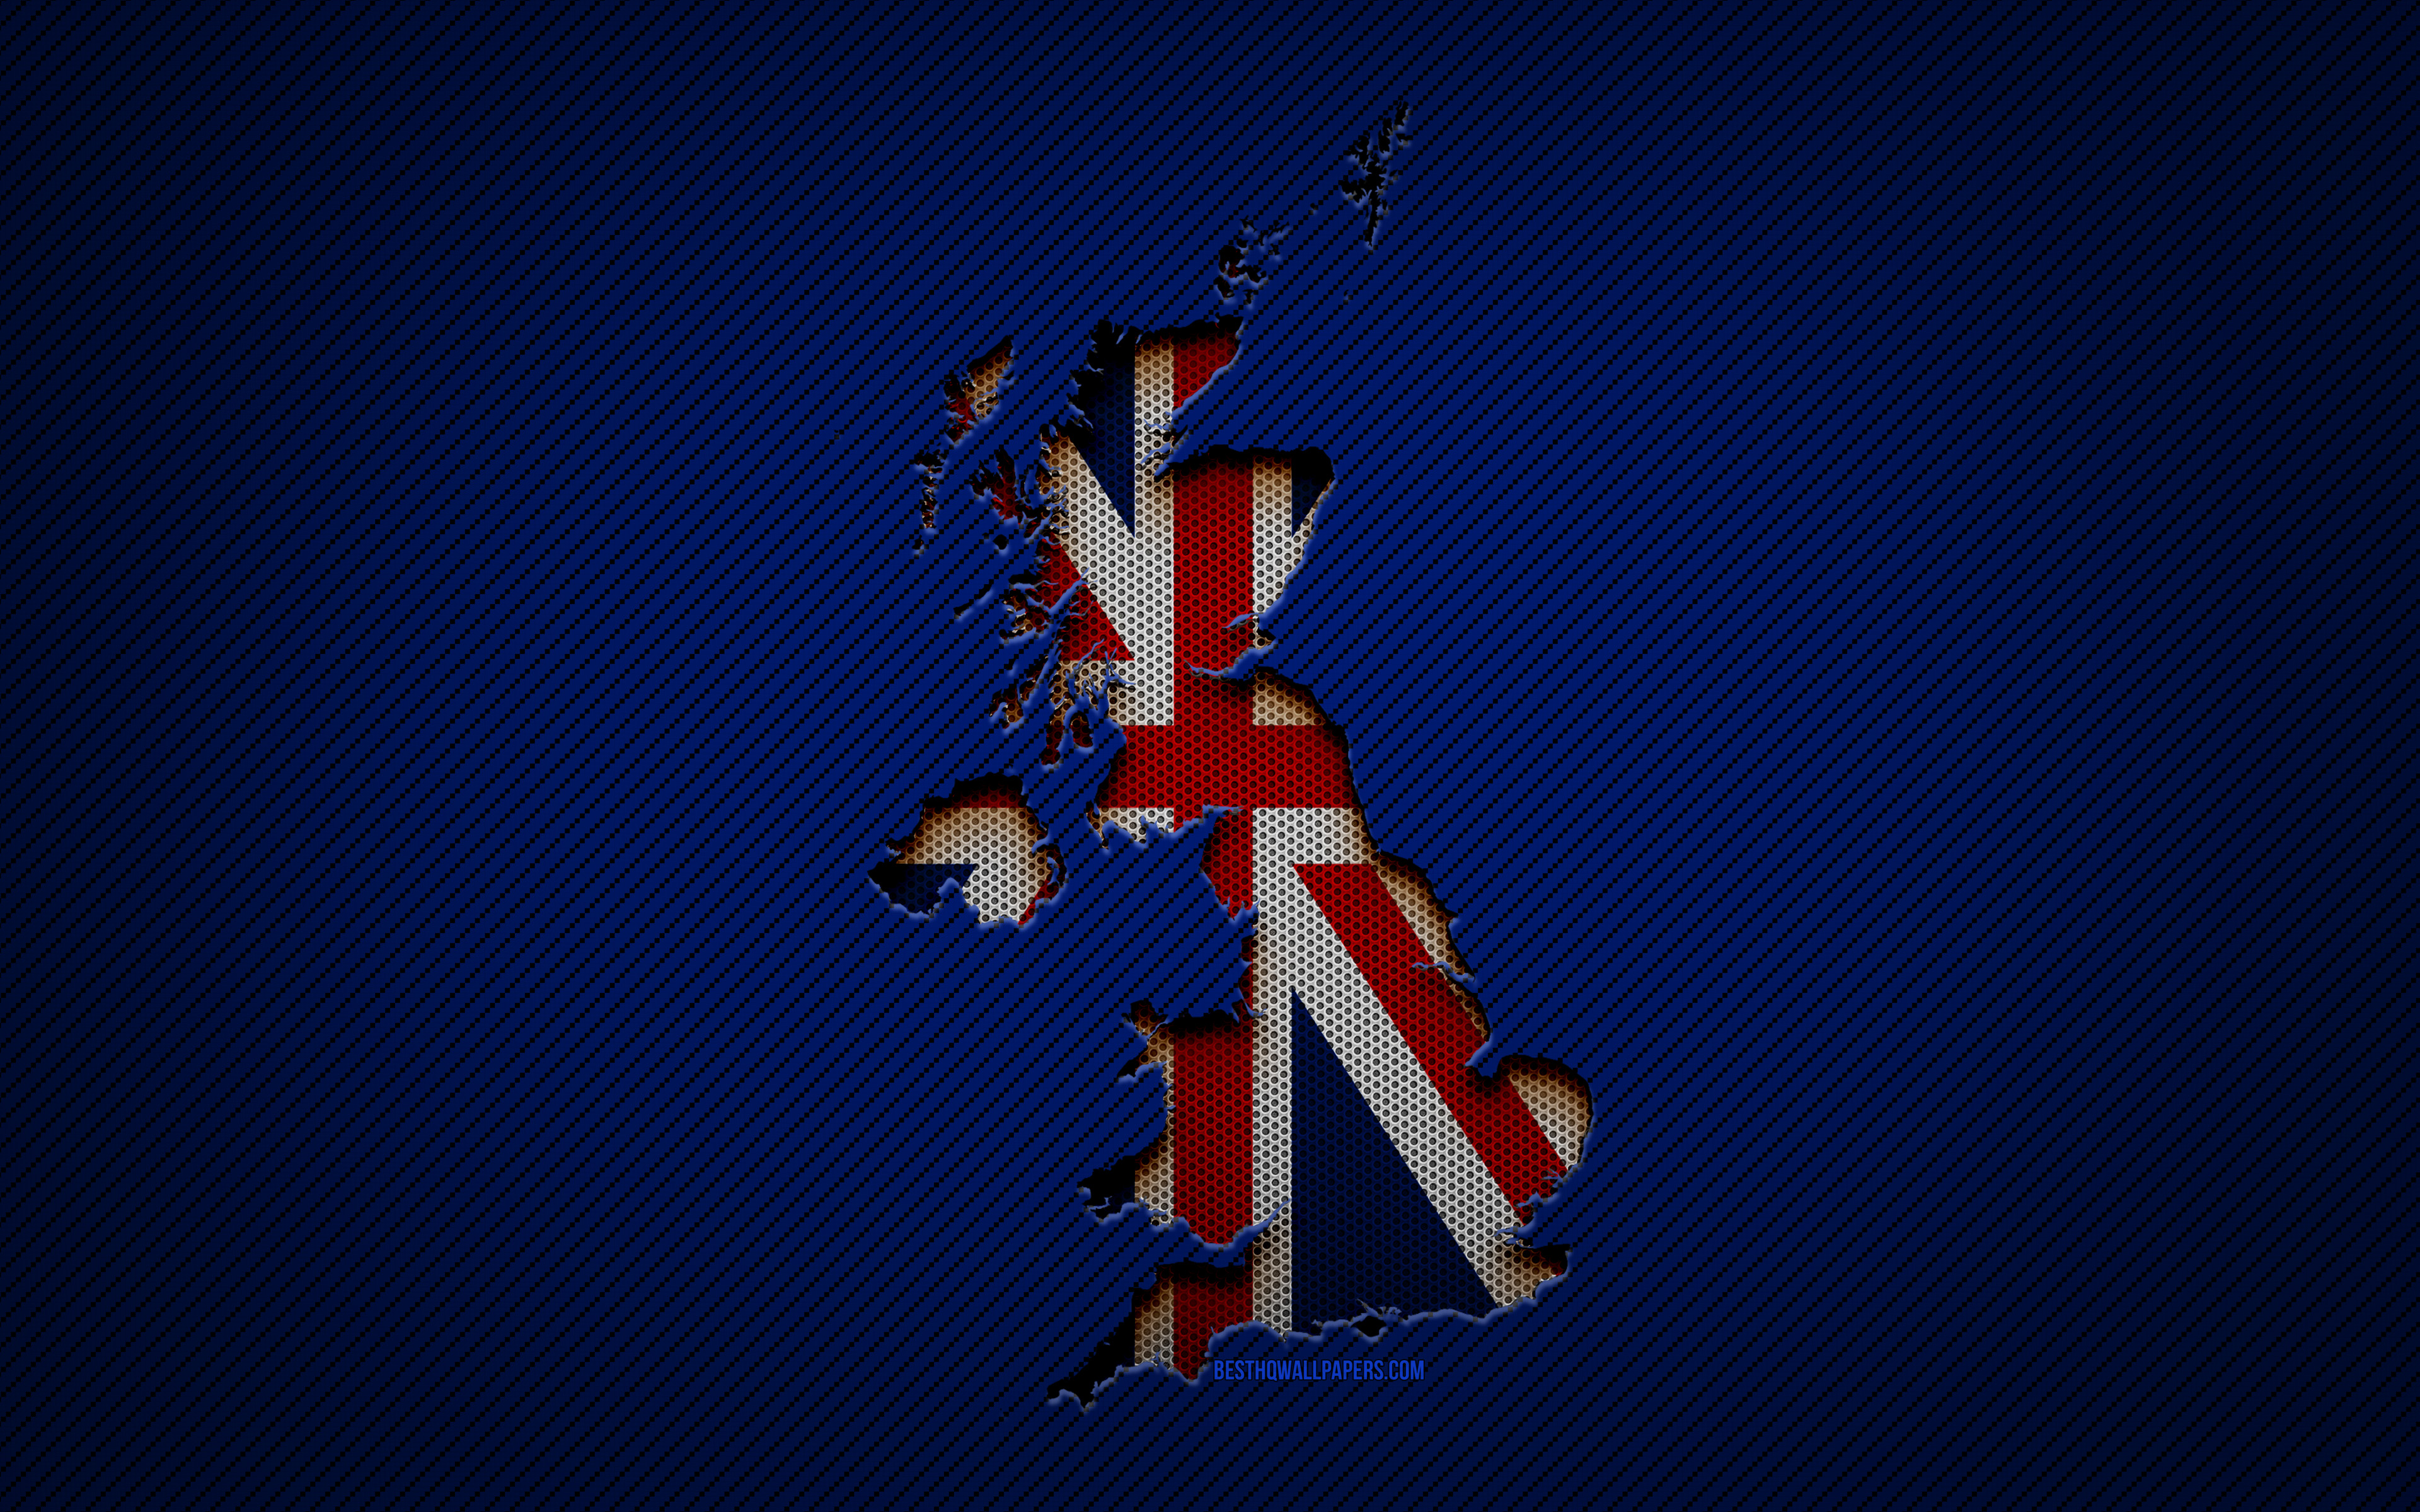 Download wallpaper United Kingdom map, 4k, European countries, United Kingdom flag, blue carbon background, United Kingdom map silhouette, Europe, UK map, United Kingdom, flag of United Kingdom for desktop with resolution 3840x2400